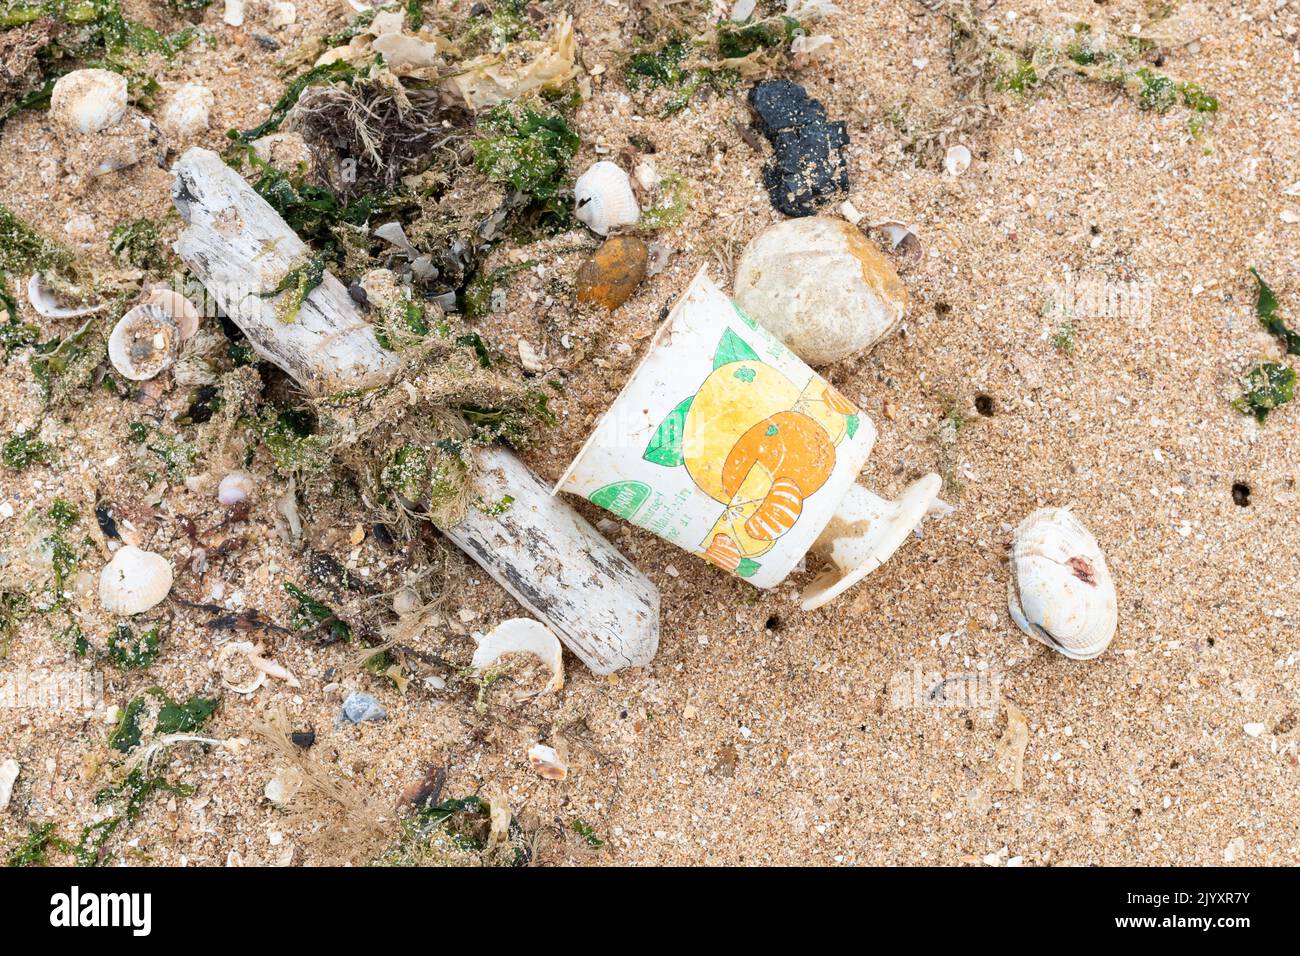 plastic pollution uk - single use plastic food packaging washed up on beach - decades old 'Dessert Farm Yogurt' pot found on beach in 2022 - England, Stock Photo